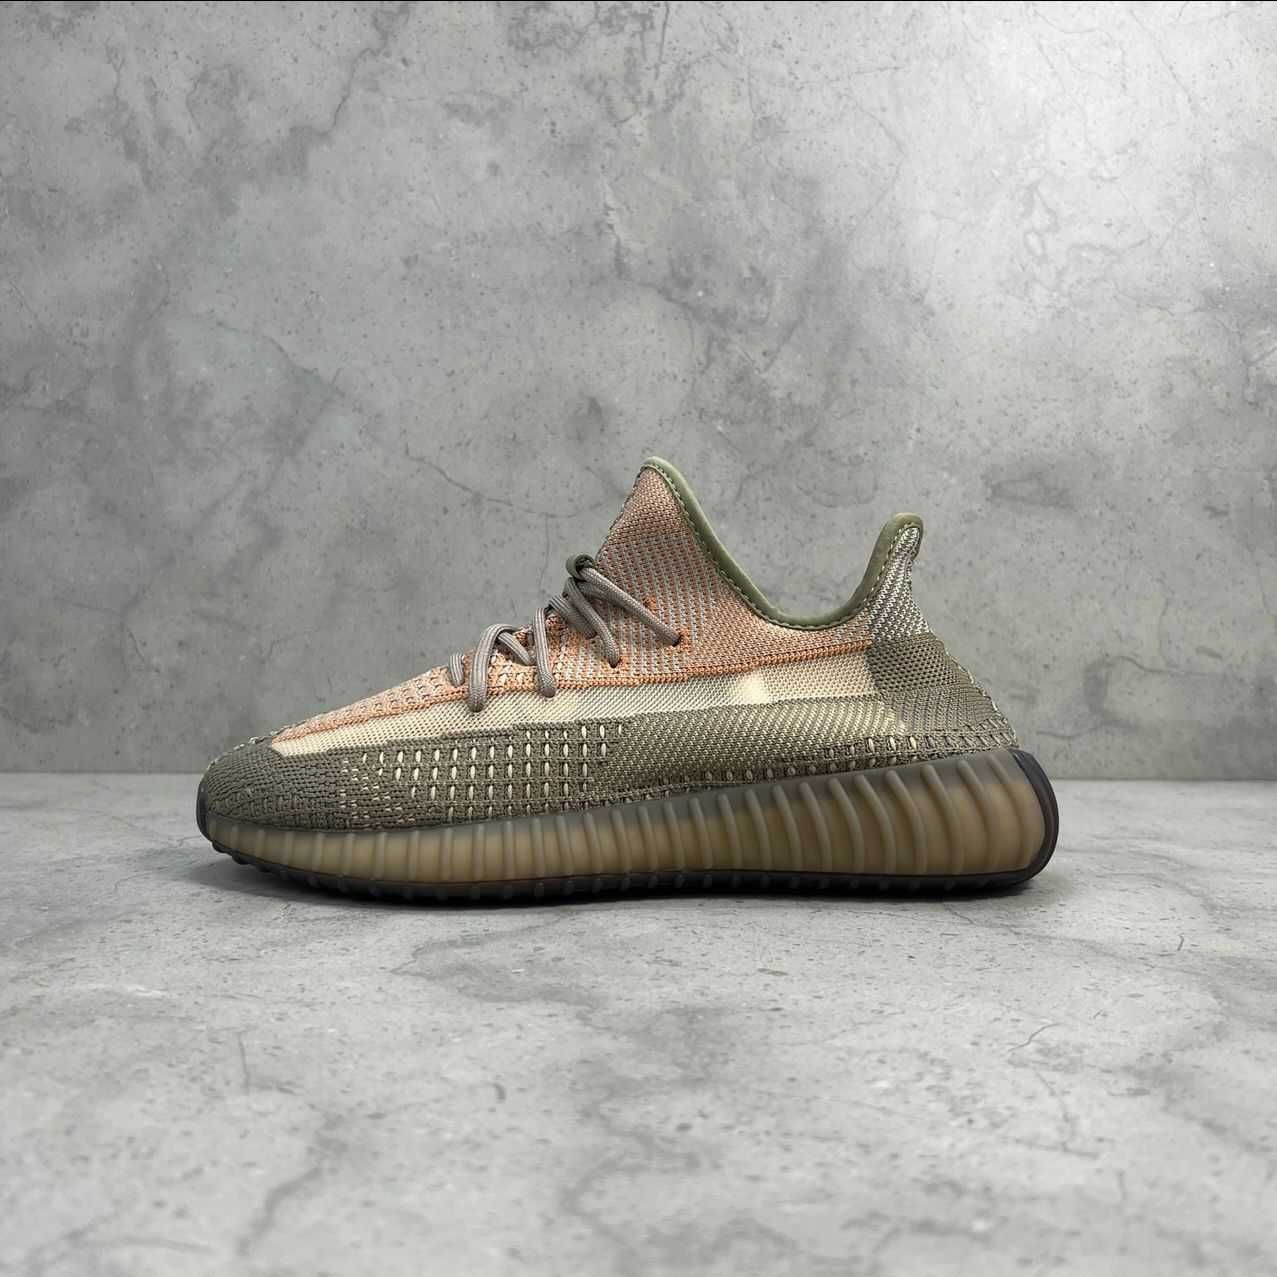 Adidas Yeezy Boost 350 V2 Sand Taupe - 40,41,42,43,44,45,46